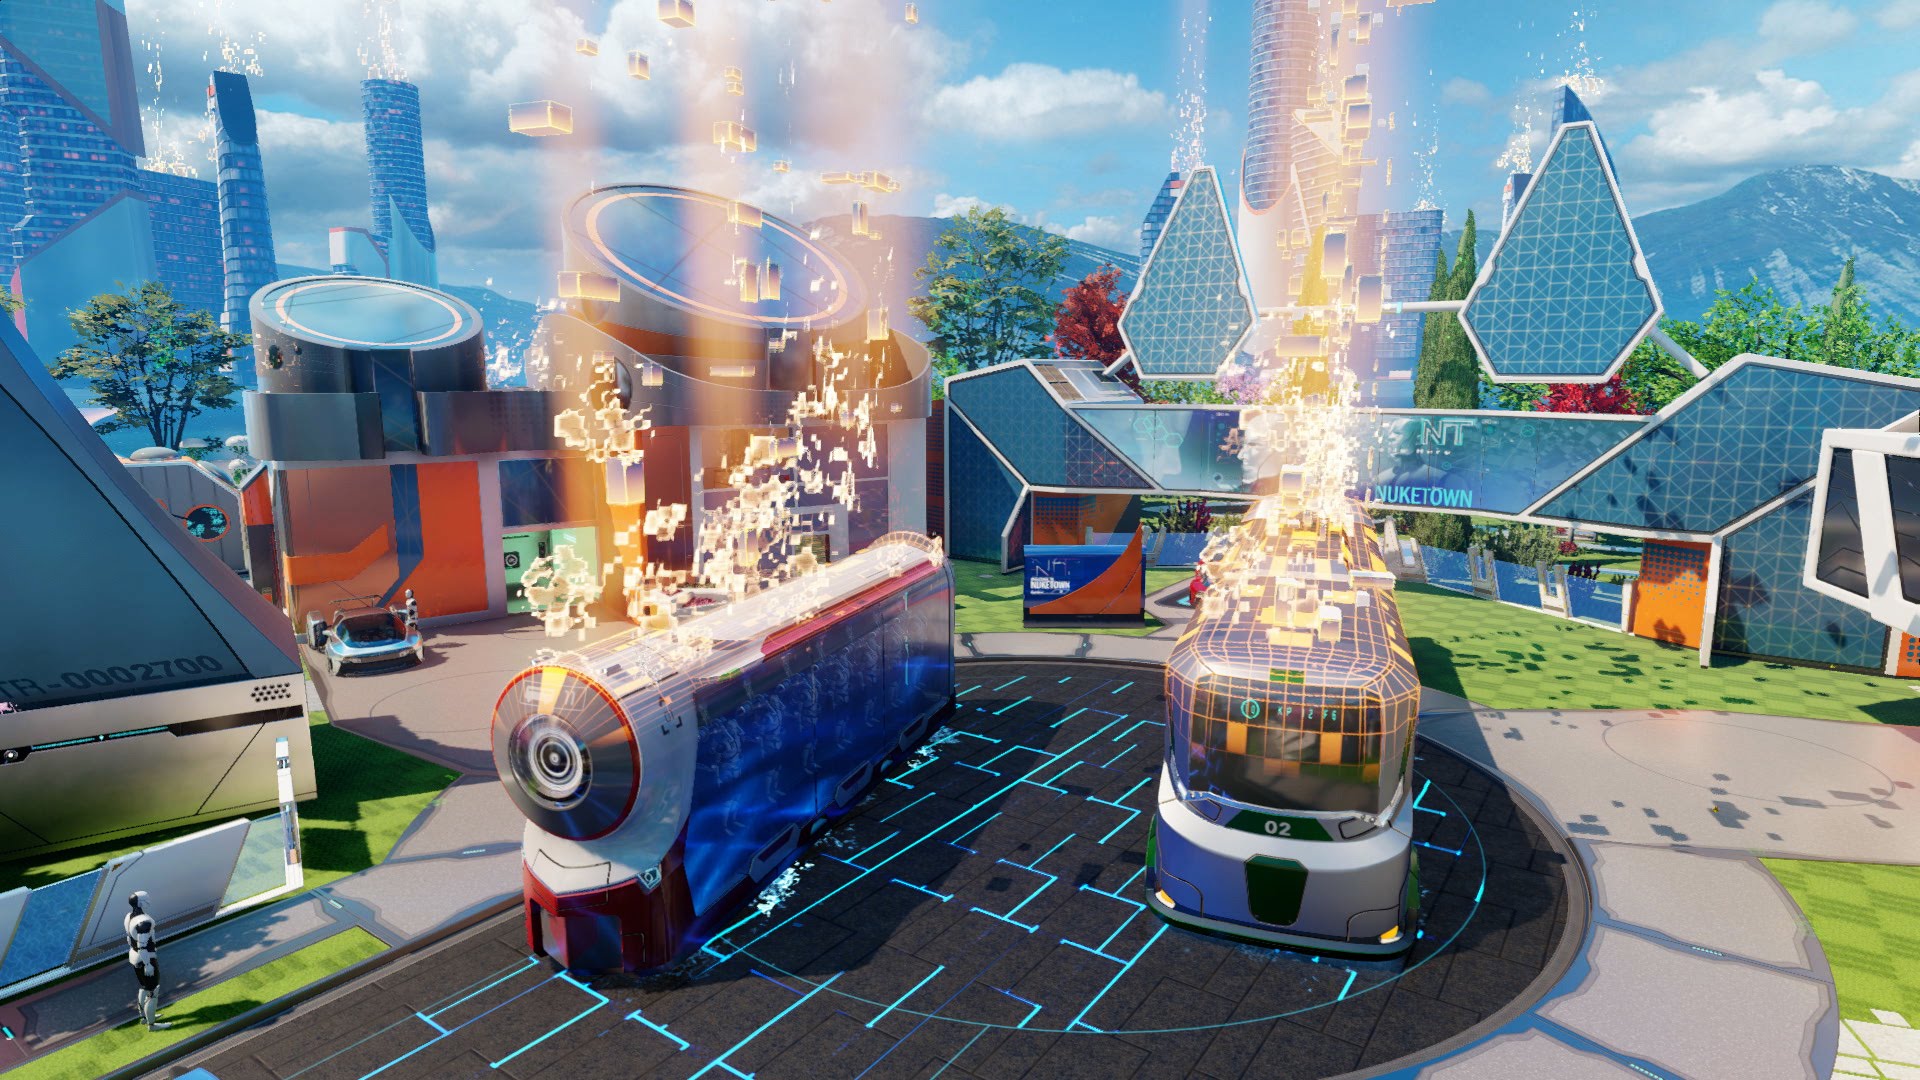 Call Of Duty Black Ops Iii Nuk3town Trailer Its Agtv